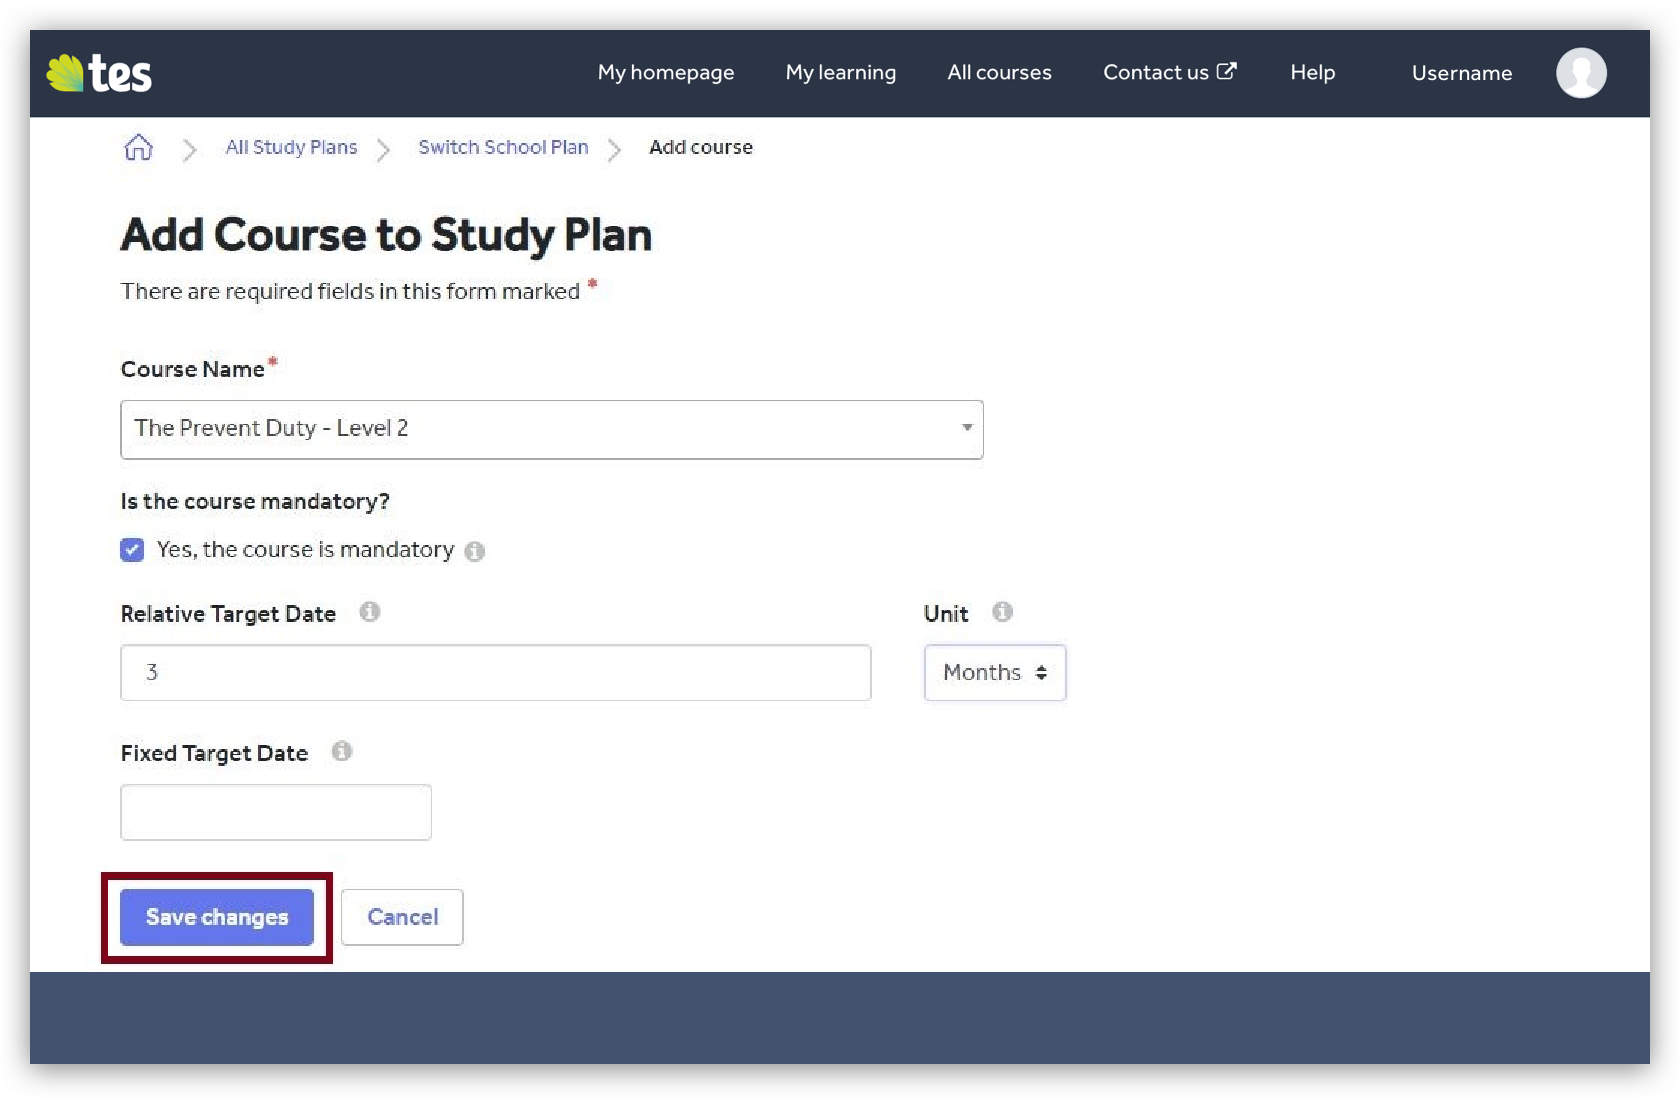 Add courses to a study plan image